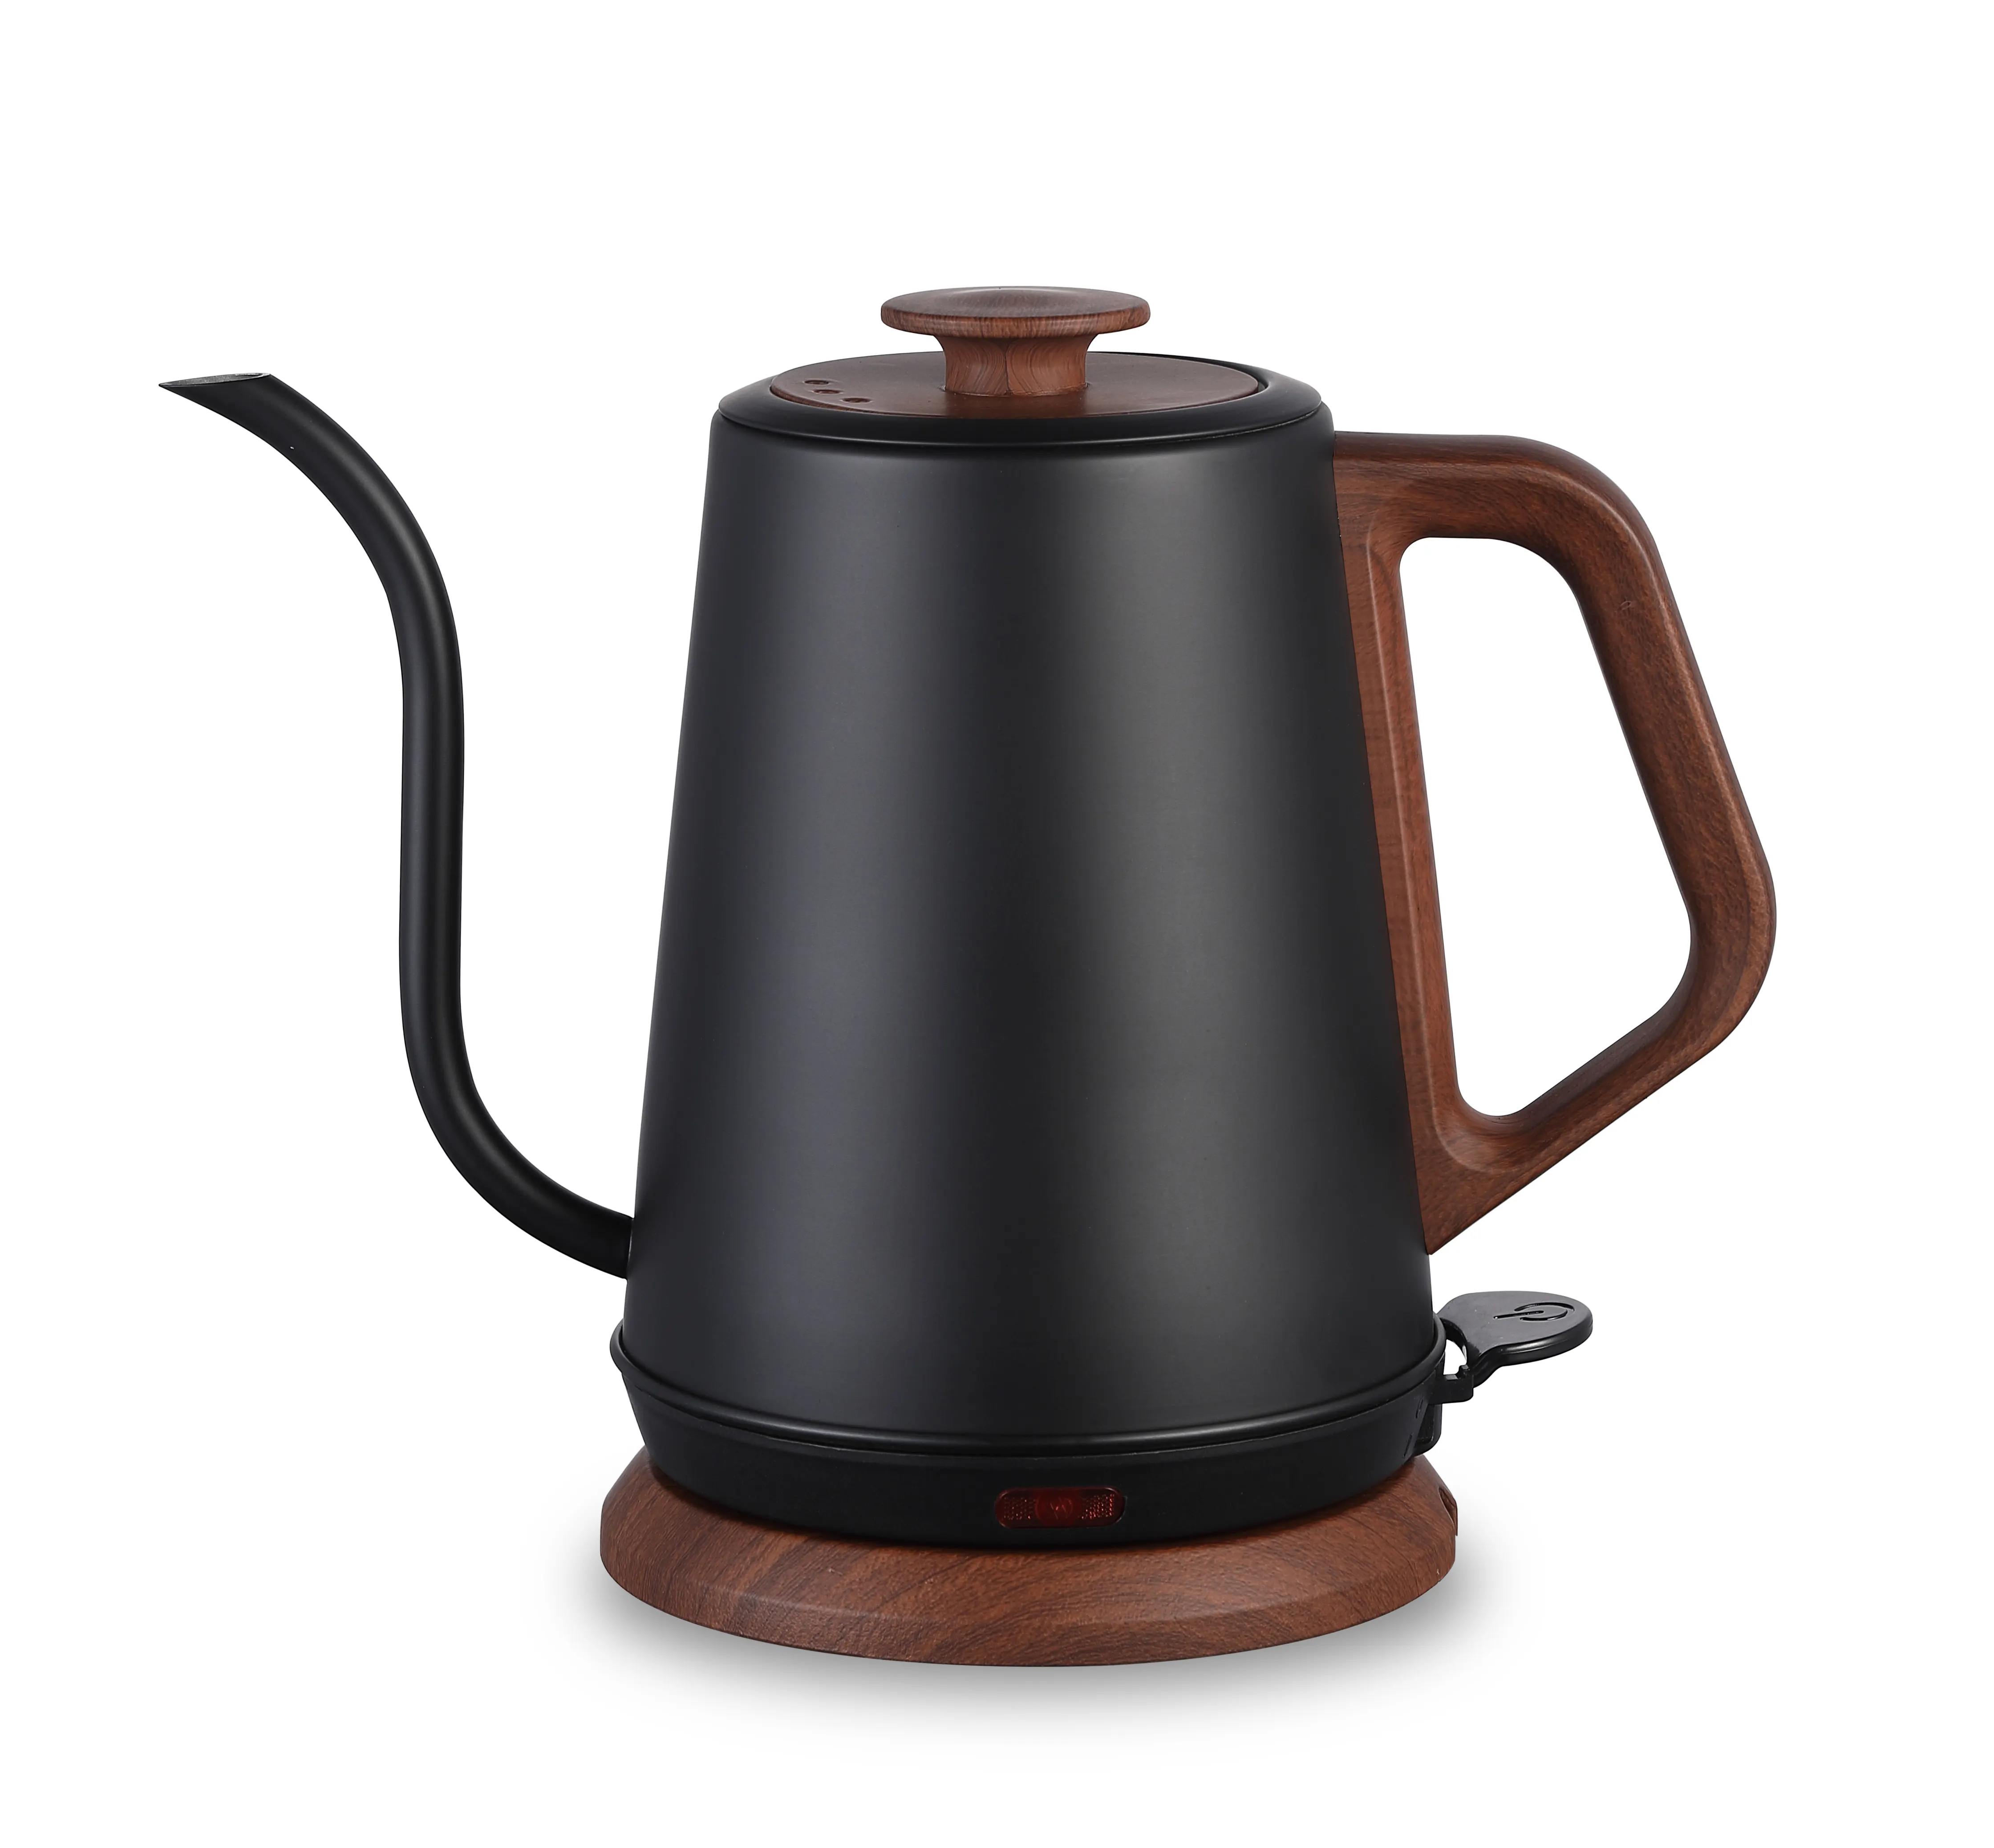 Elegant Cordless Gooseneck Electric Kettle for Household and Hotel Use for Coffee and Tea Making